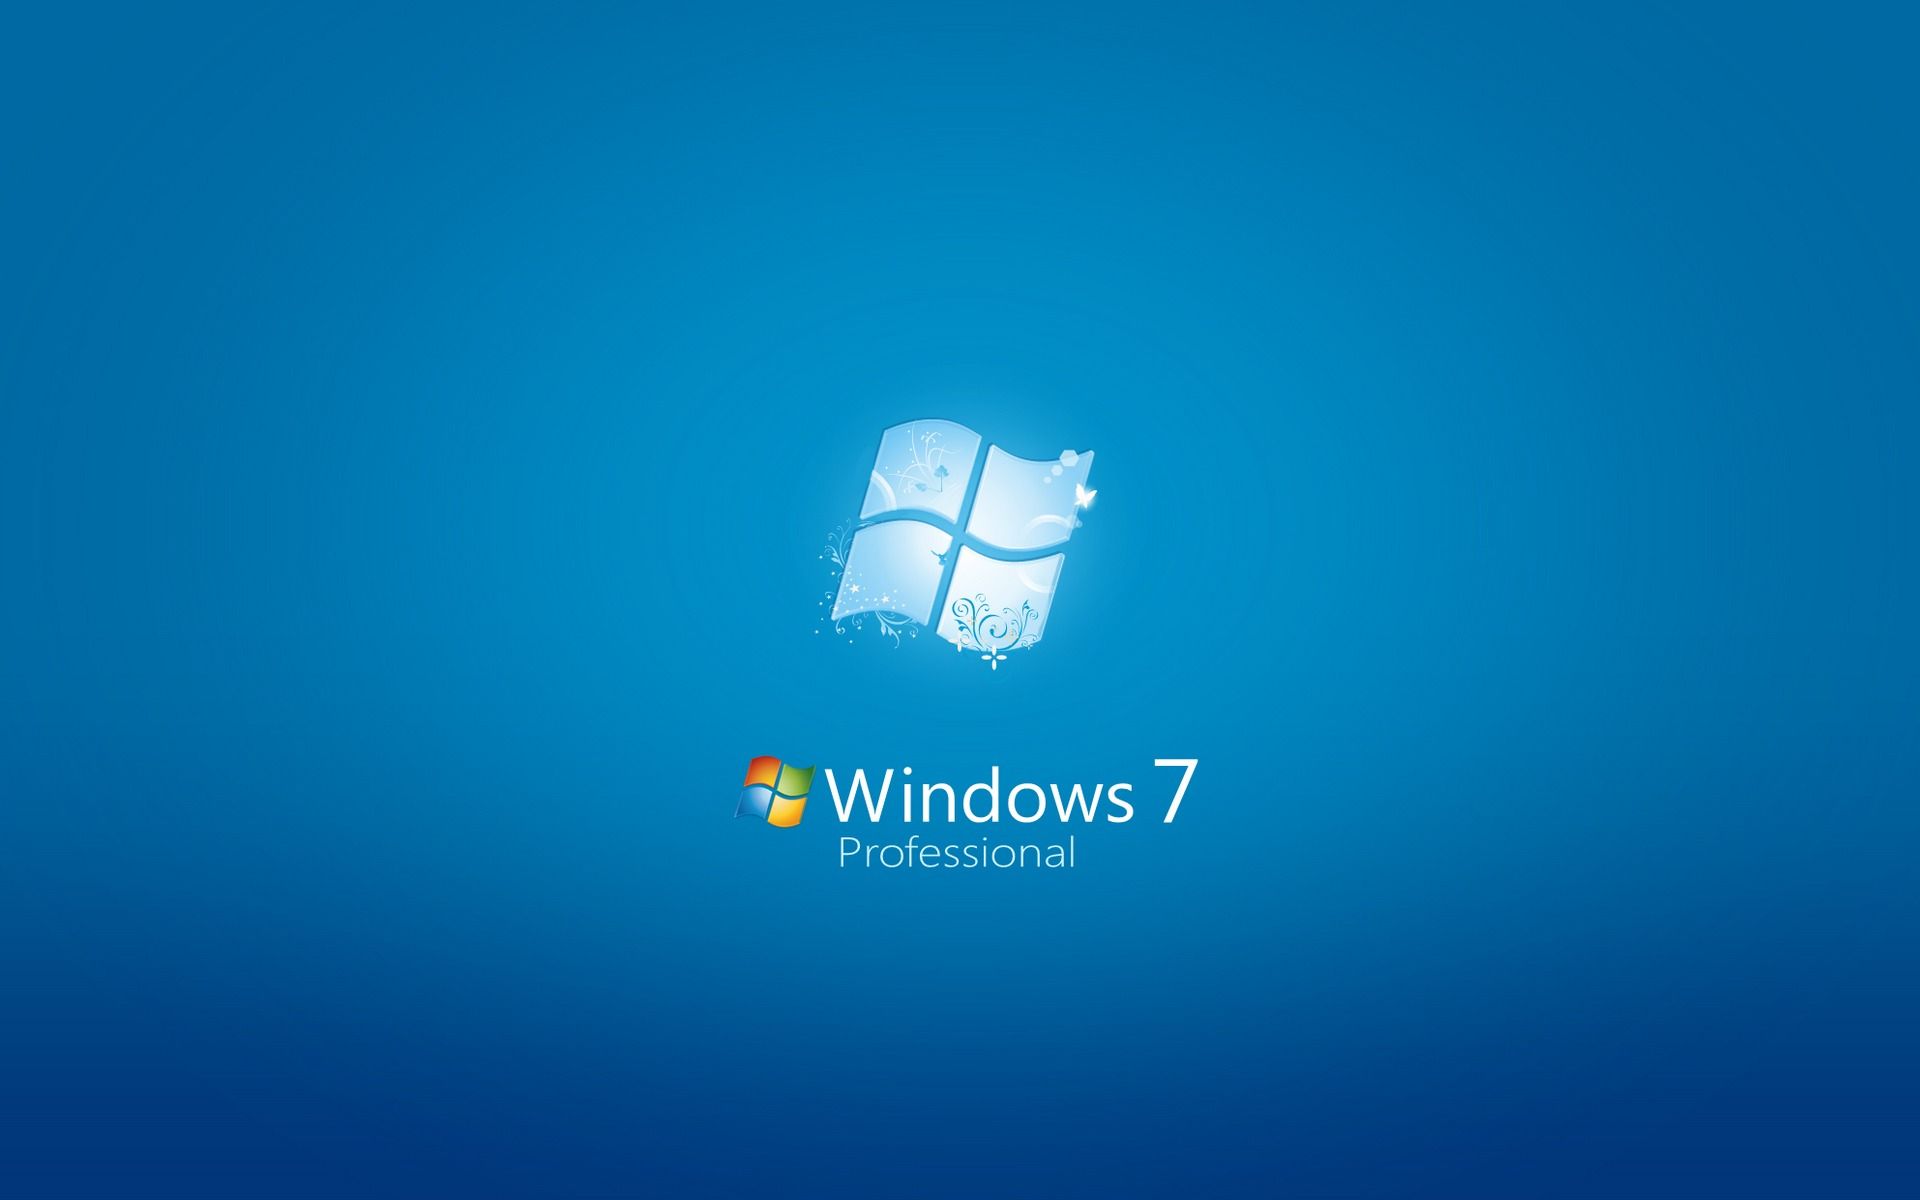 Windows 7 Professional Wallpapers HD Backgrounds